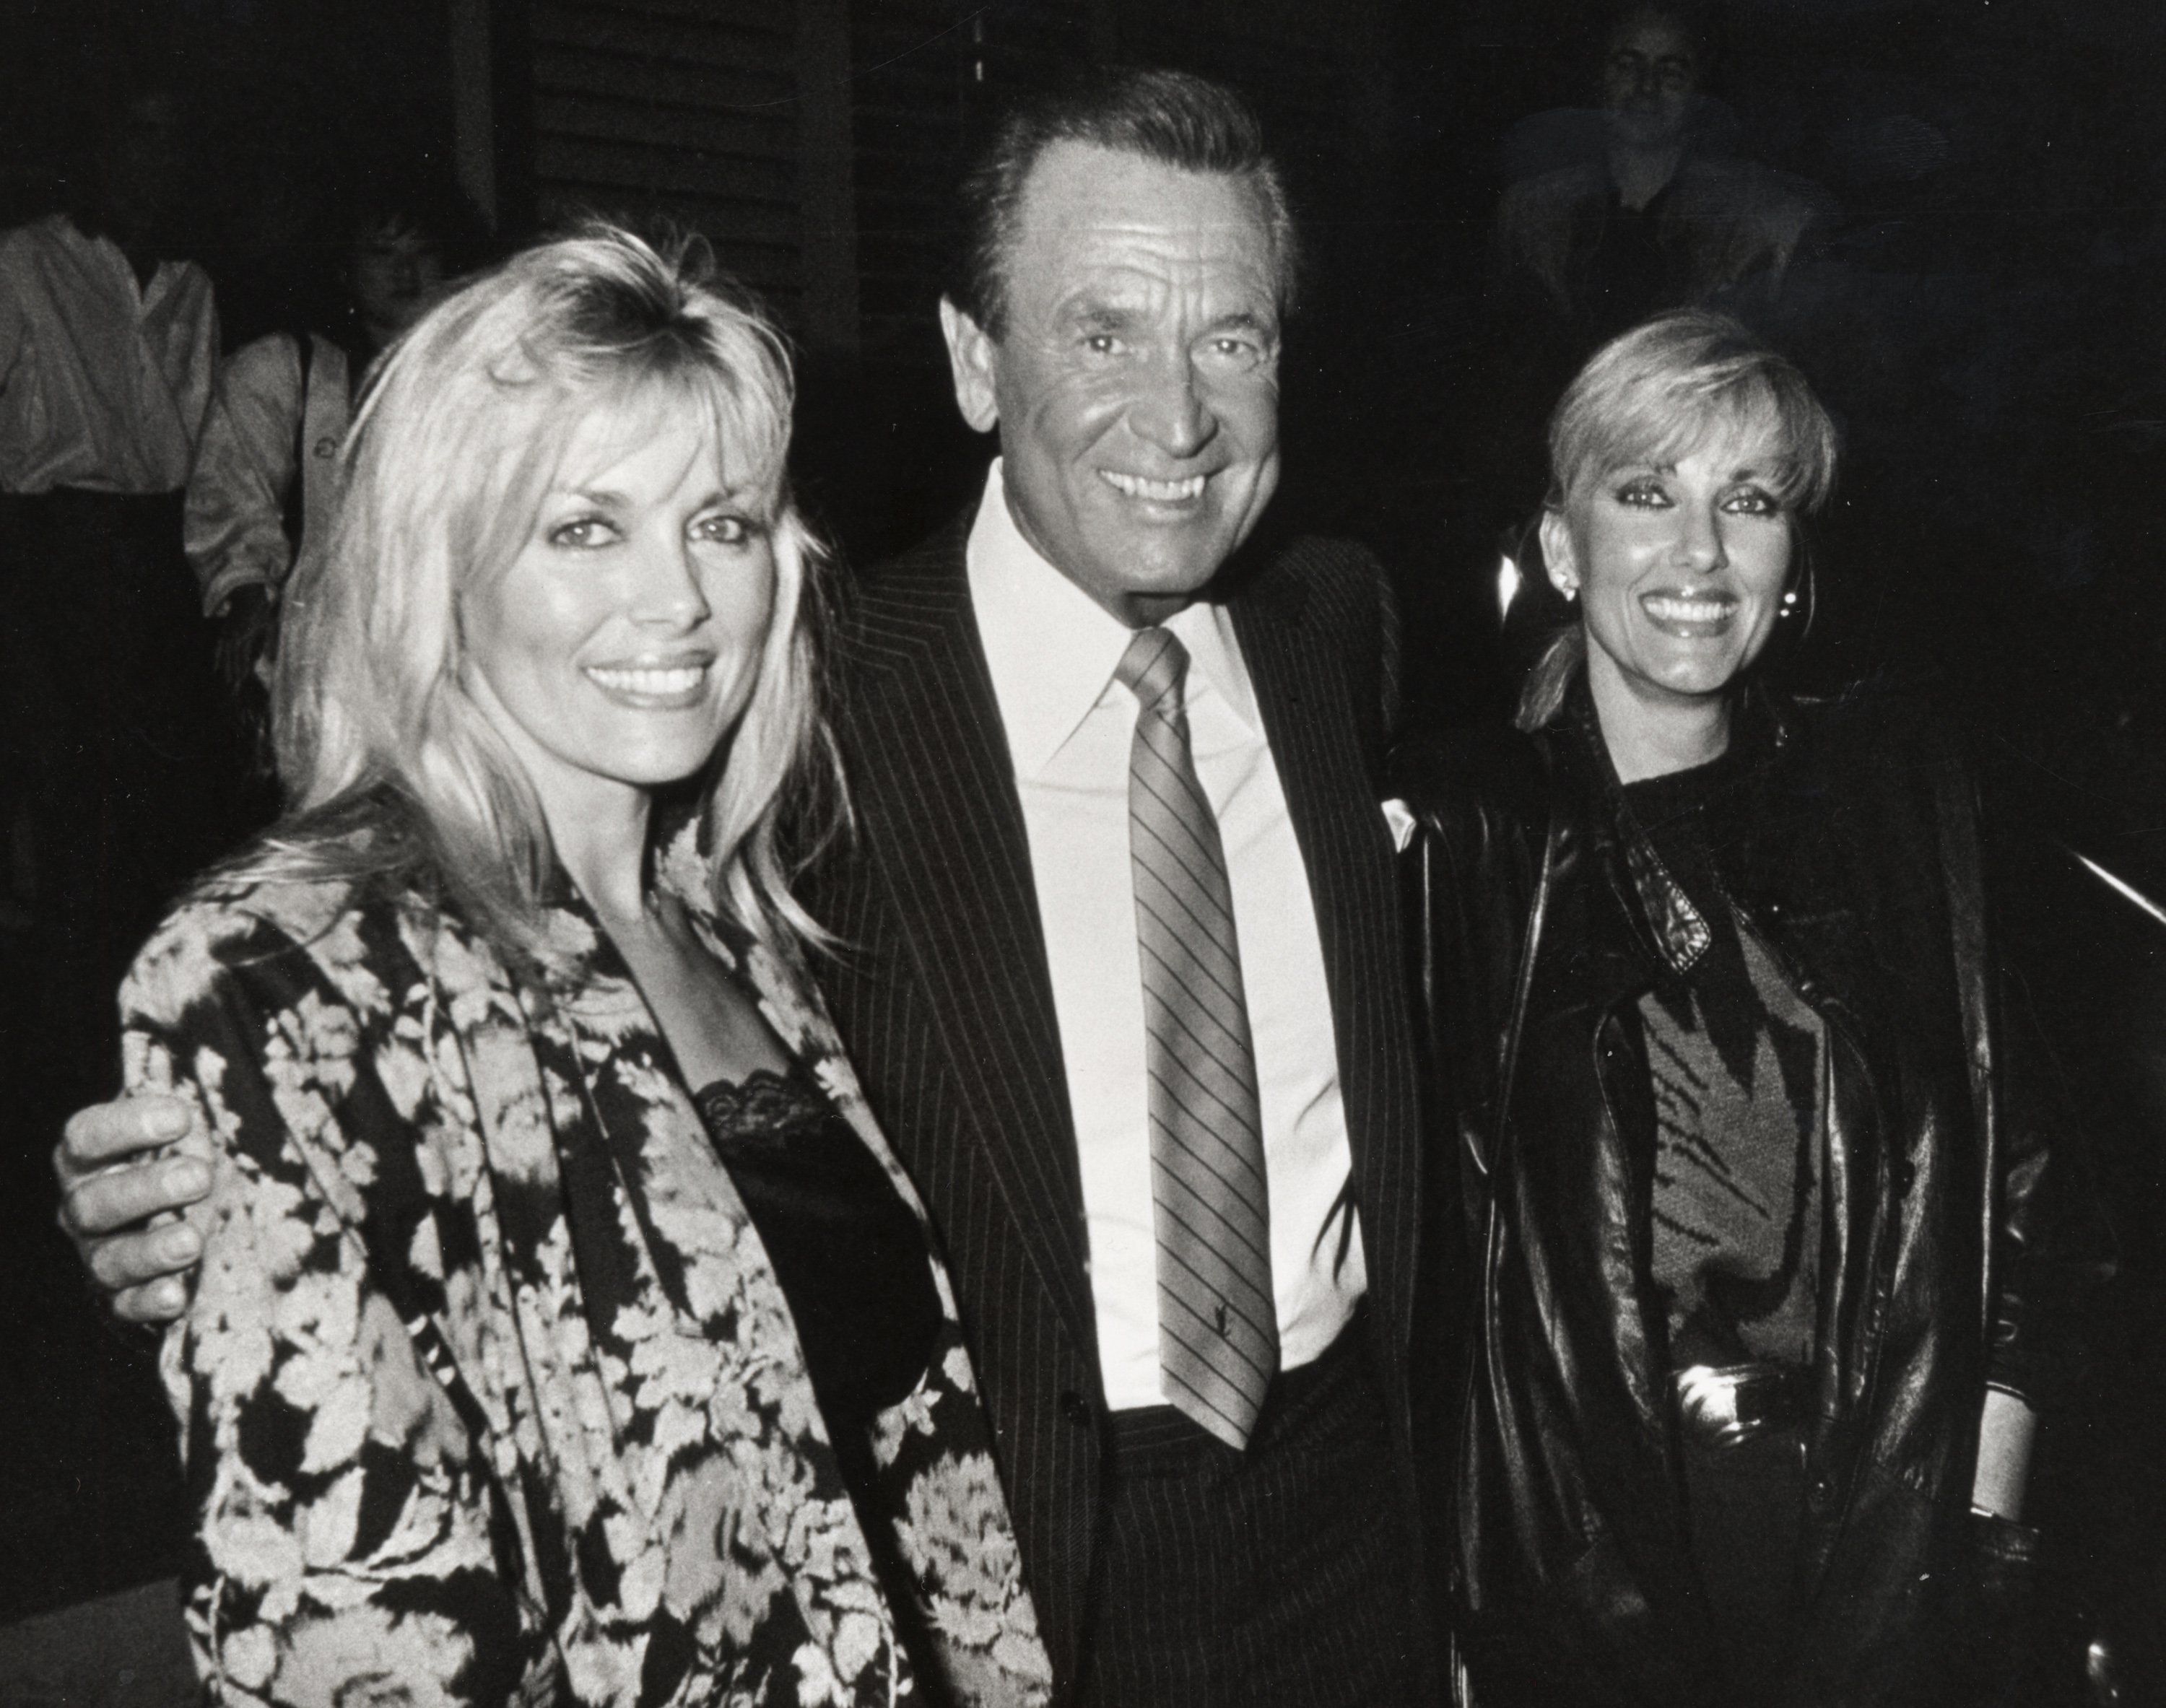 Bob Barker, Dian Parkinson, and Janice Pennington during Bob Barker and Friends Sighting at Nicky Blair's Restaurant - November 11, 1986 at Nicky Blair's Restaurant in Hollywood, California | Source: Getty Images